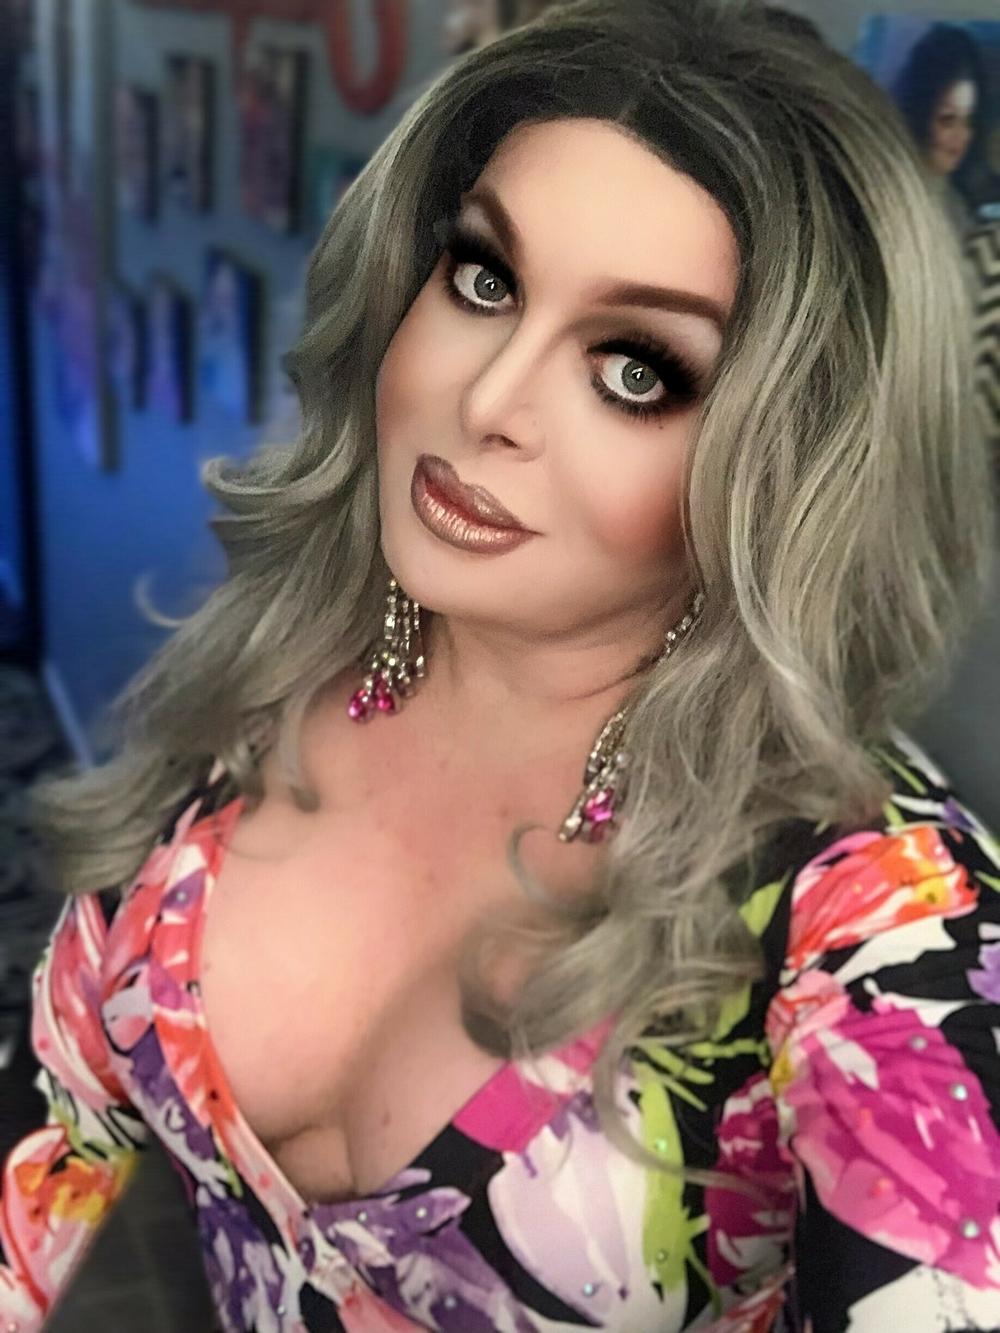 Wendy Williams is a bar owner in Cookeville, Tennessee. She's concerned about recent proposals in her state that would restrict drag show performances.